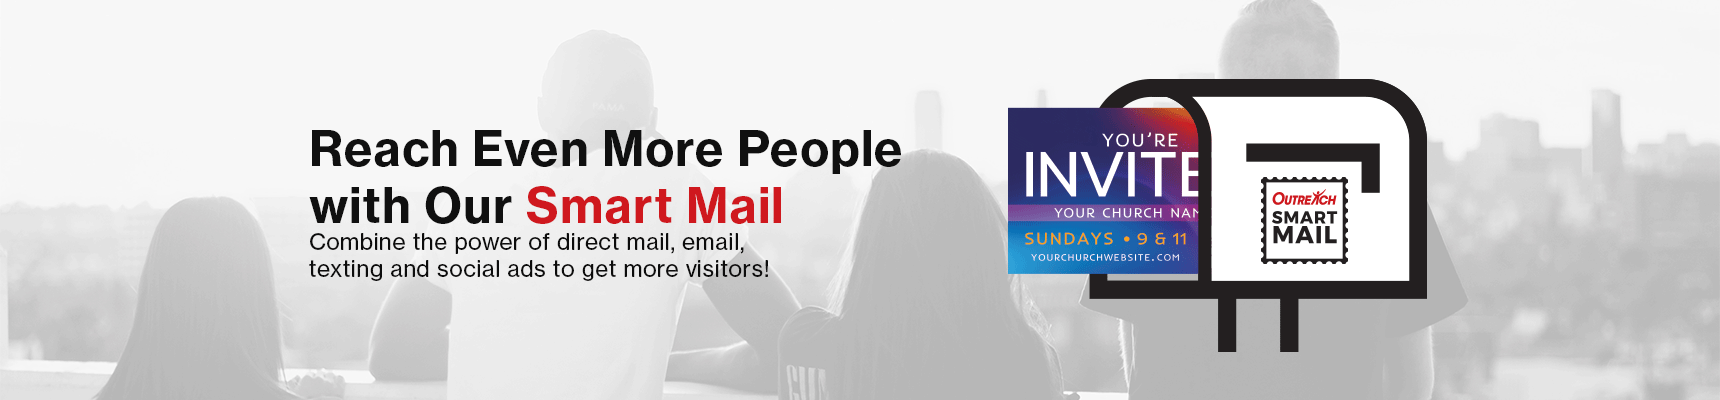 Reach Even More People with Outreach Smart Mail